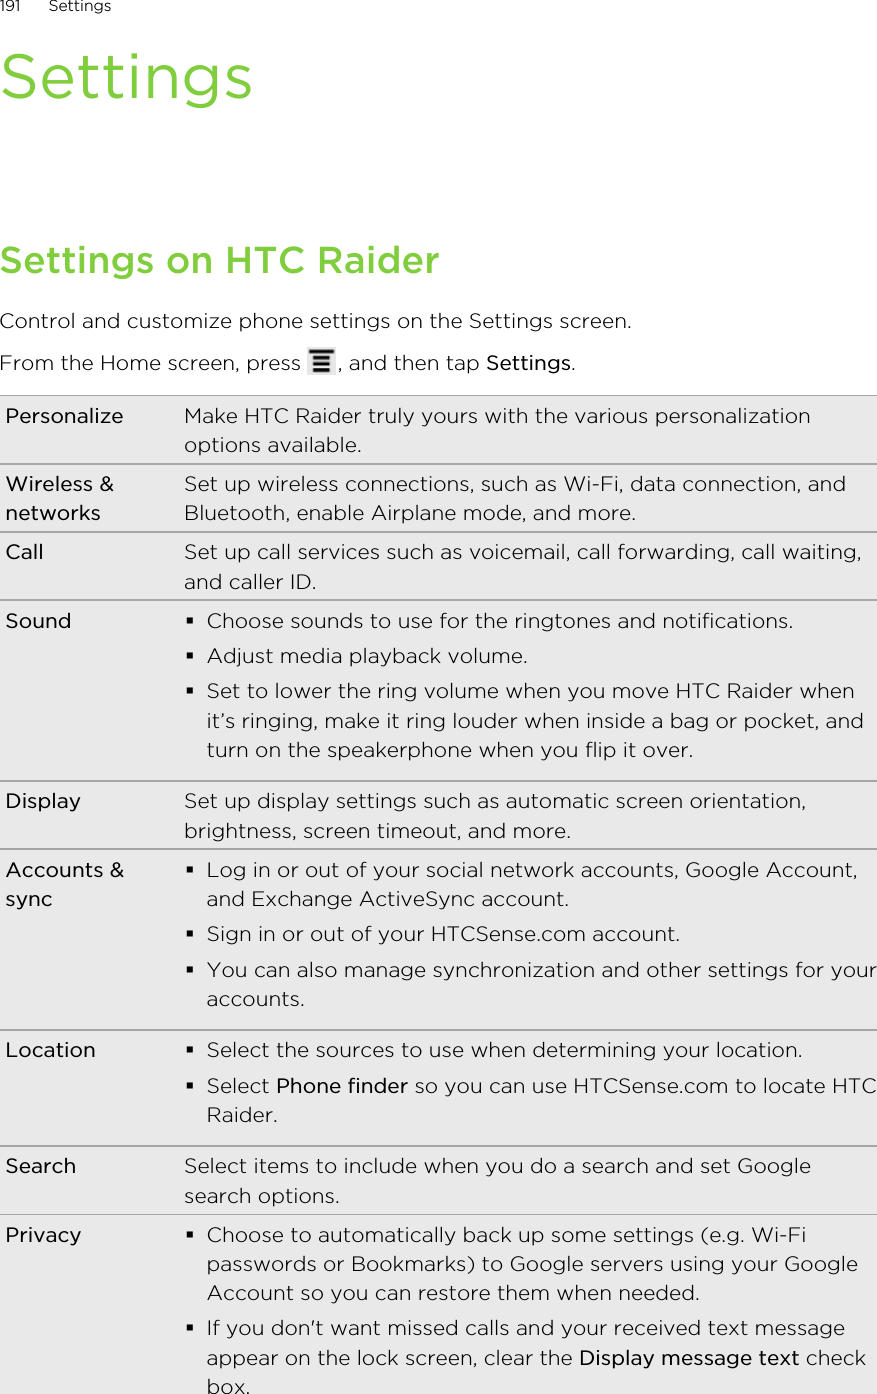 SettingsSettings on HTC RaiderControl and customize phone settings on the Settings screen.From the Home screen, press  , and then tap Settings.Personalize Make HTC Raider truly yours with the various personalizationoptions available.Wireless &amp;networksSet up wireless connections, such as Wi-Fi, data connection, andBluetooth, enable Airplane mode, and more.Call Set up call services such as voicemail, call forwarding, call waiting,and caller ID.Sound §Choose sounds to use for the ringtones and notifications.§Adjust media playback volume.§Set to lower the ring volume when you move HTC Raider whenit’s ringing, make it ring louder when inside a bag or pocket, andturn on the speakerphone when you flip it over.Display Set up display settings such as automatic screen orientation,brightness, screen timeout, and more.Accounts &amp;sync§Log in or out of your social network accounts, Google Account,and Exchange ActiveSync account.§Sign in or out of your HTCSense.com account.§You can also manage synchronization and other settings for youraccounts.Location §Select the sources to use when determining your location.§Select Phone finder so you can use HTCSense.com to locate HTCRaider.Search Select items to include when you do a search and set Googlesearch options.Privacy §Choose to automatically back up some settings (e.g. Wi-Fipasswords or Bookmarks) to Google servers using your GoogleAccount so you can restore them when needed.§If you don&apos;t want missed calls and your received text messageappear on the lock screen, clear the Display message text checkbox.191 Settings